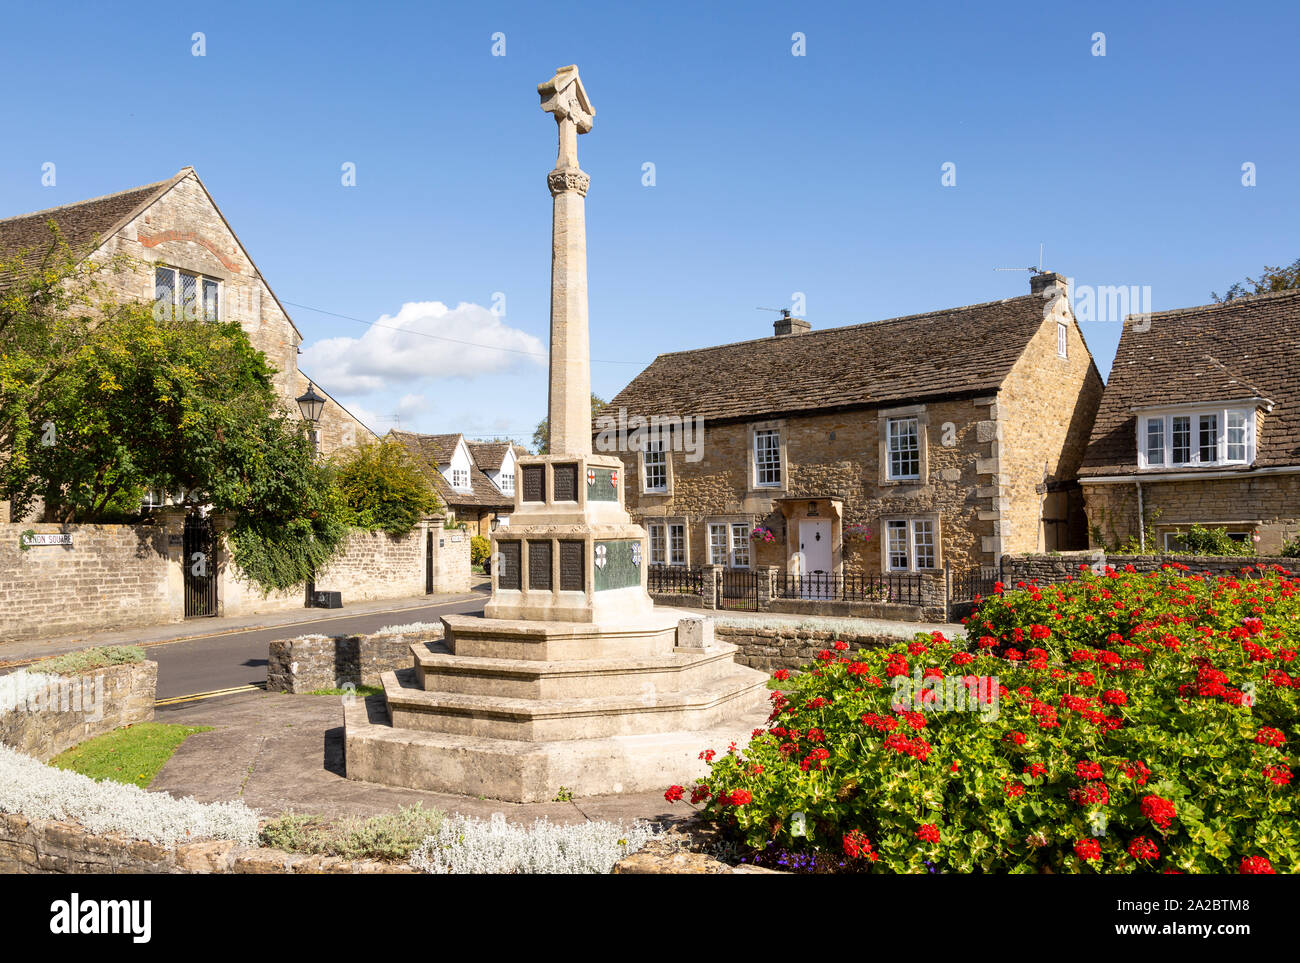 Historic Cotswold stone buildings and war memorial in Canon Square, Melksham, Wiltshire, England, UK Stock Photo